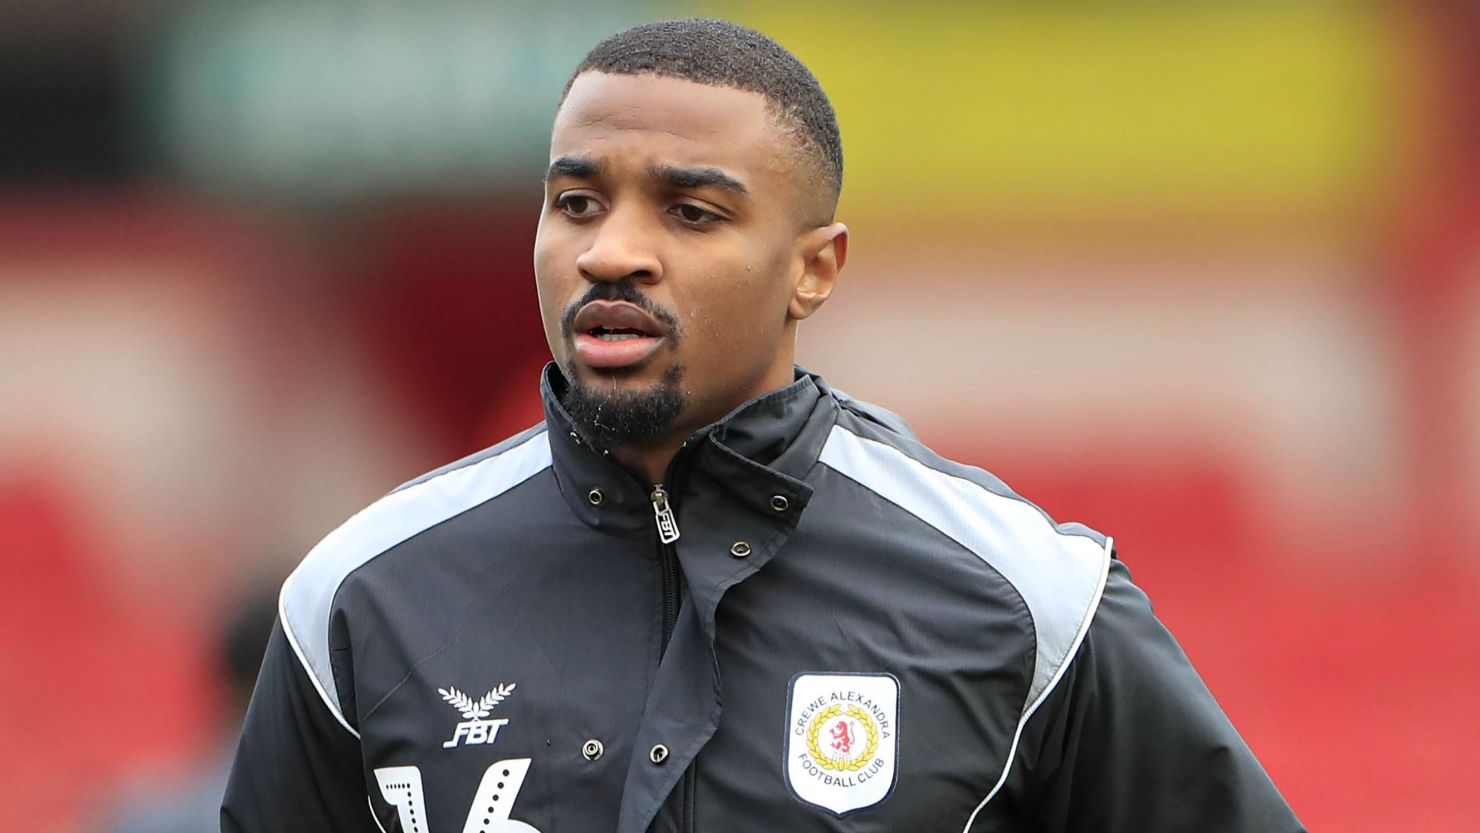 Professional footballer Christian Mbulu, playing here for Crewe, dies aged 23.